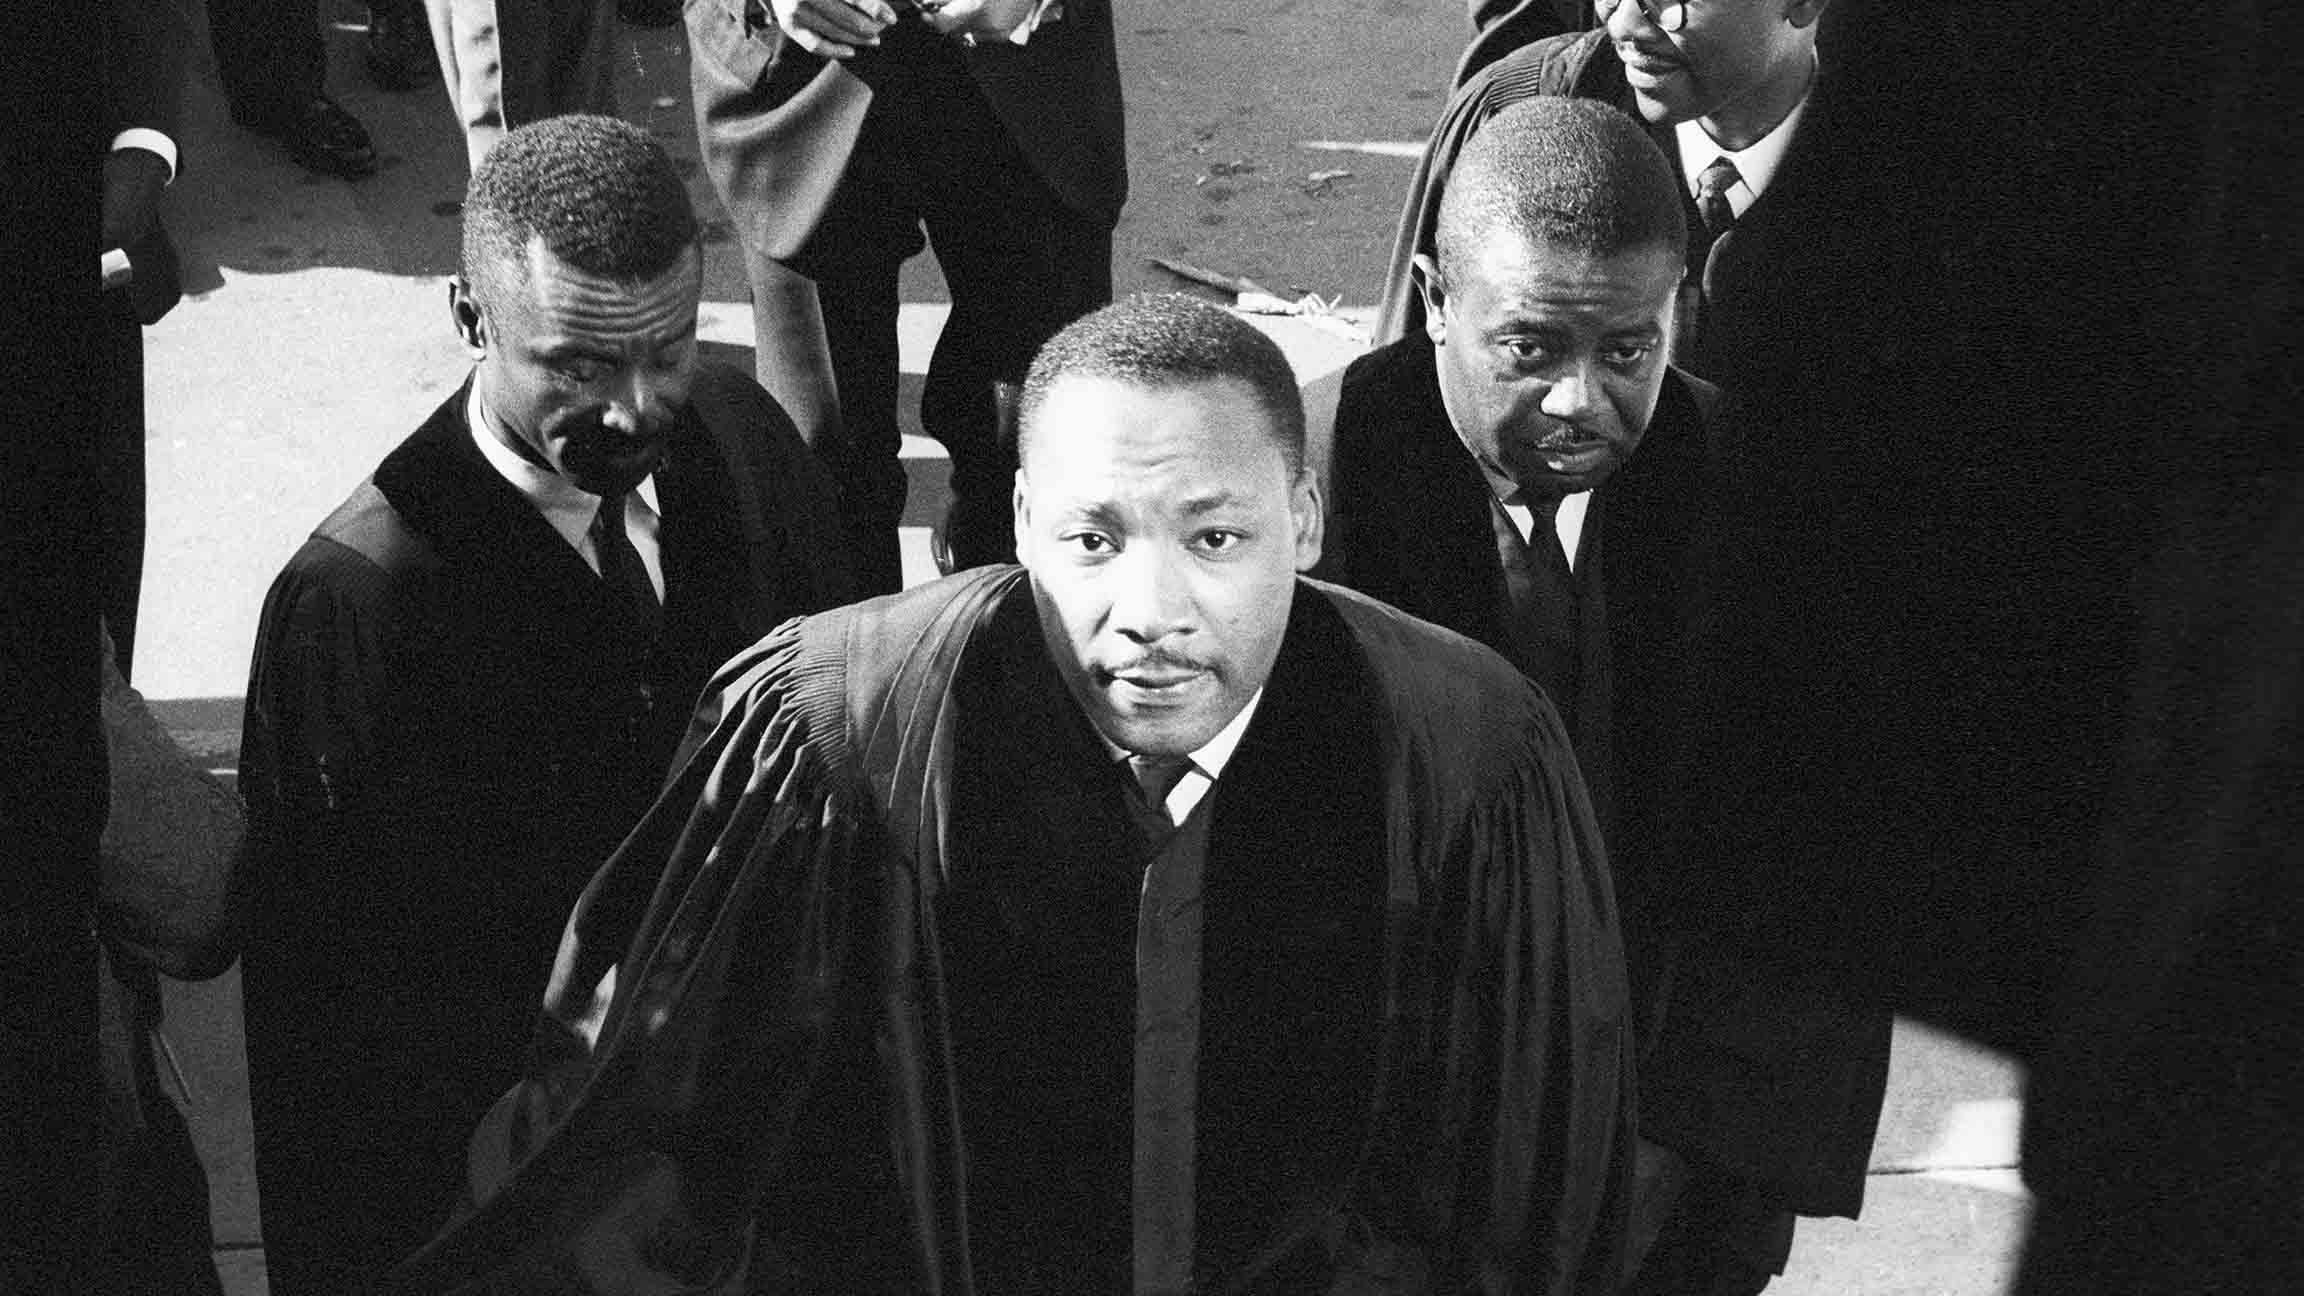 Civil Rights leaders Fred Shuttlesworth, left, Martin Luther King Jr., center, and Ralph Abernathy, right, attend a funeral for victims of the 16th Street Church bombing in Birmingham, Alabama. The Sept. 15, 1963 bombing killed four young African-American girls. (Chicago History Museum)